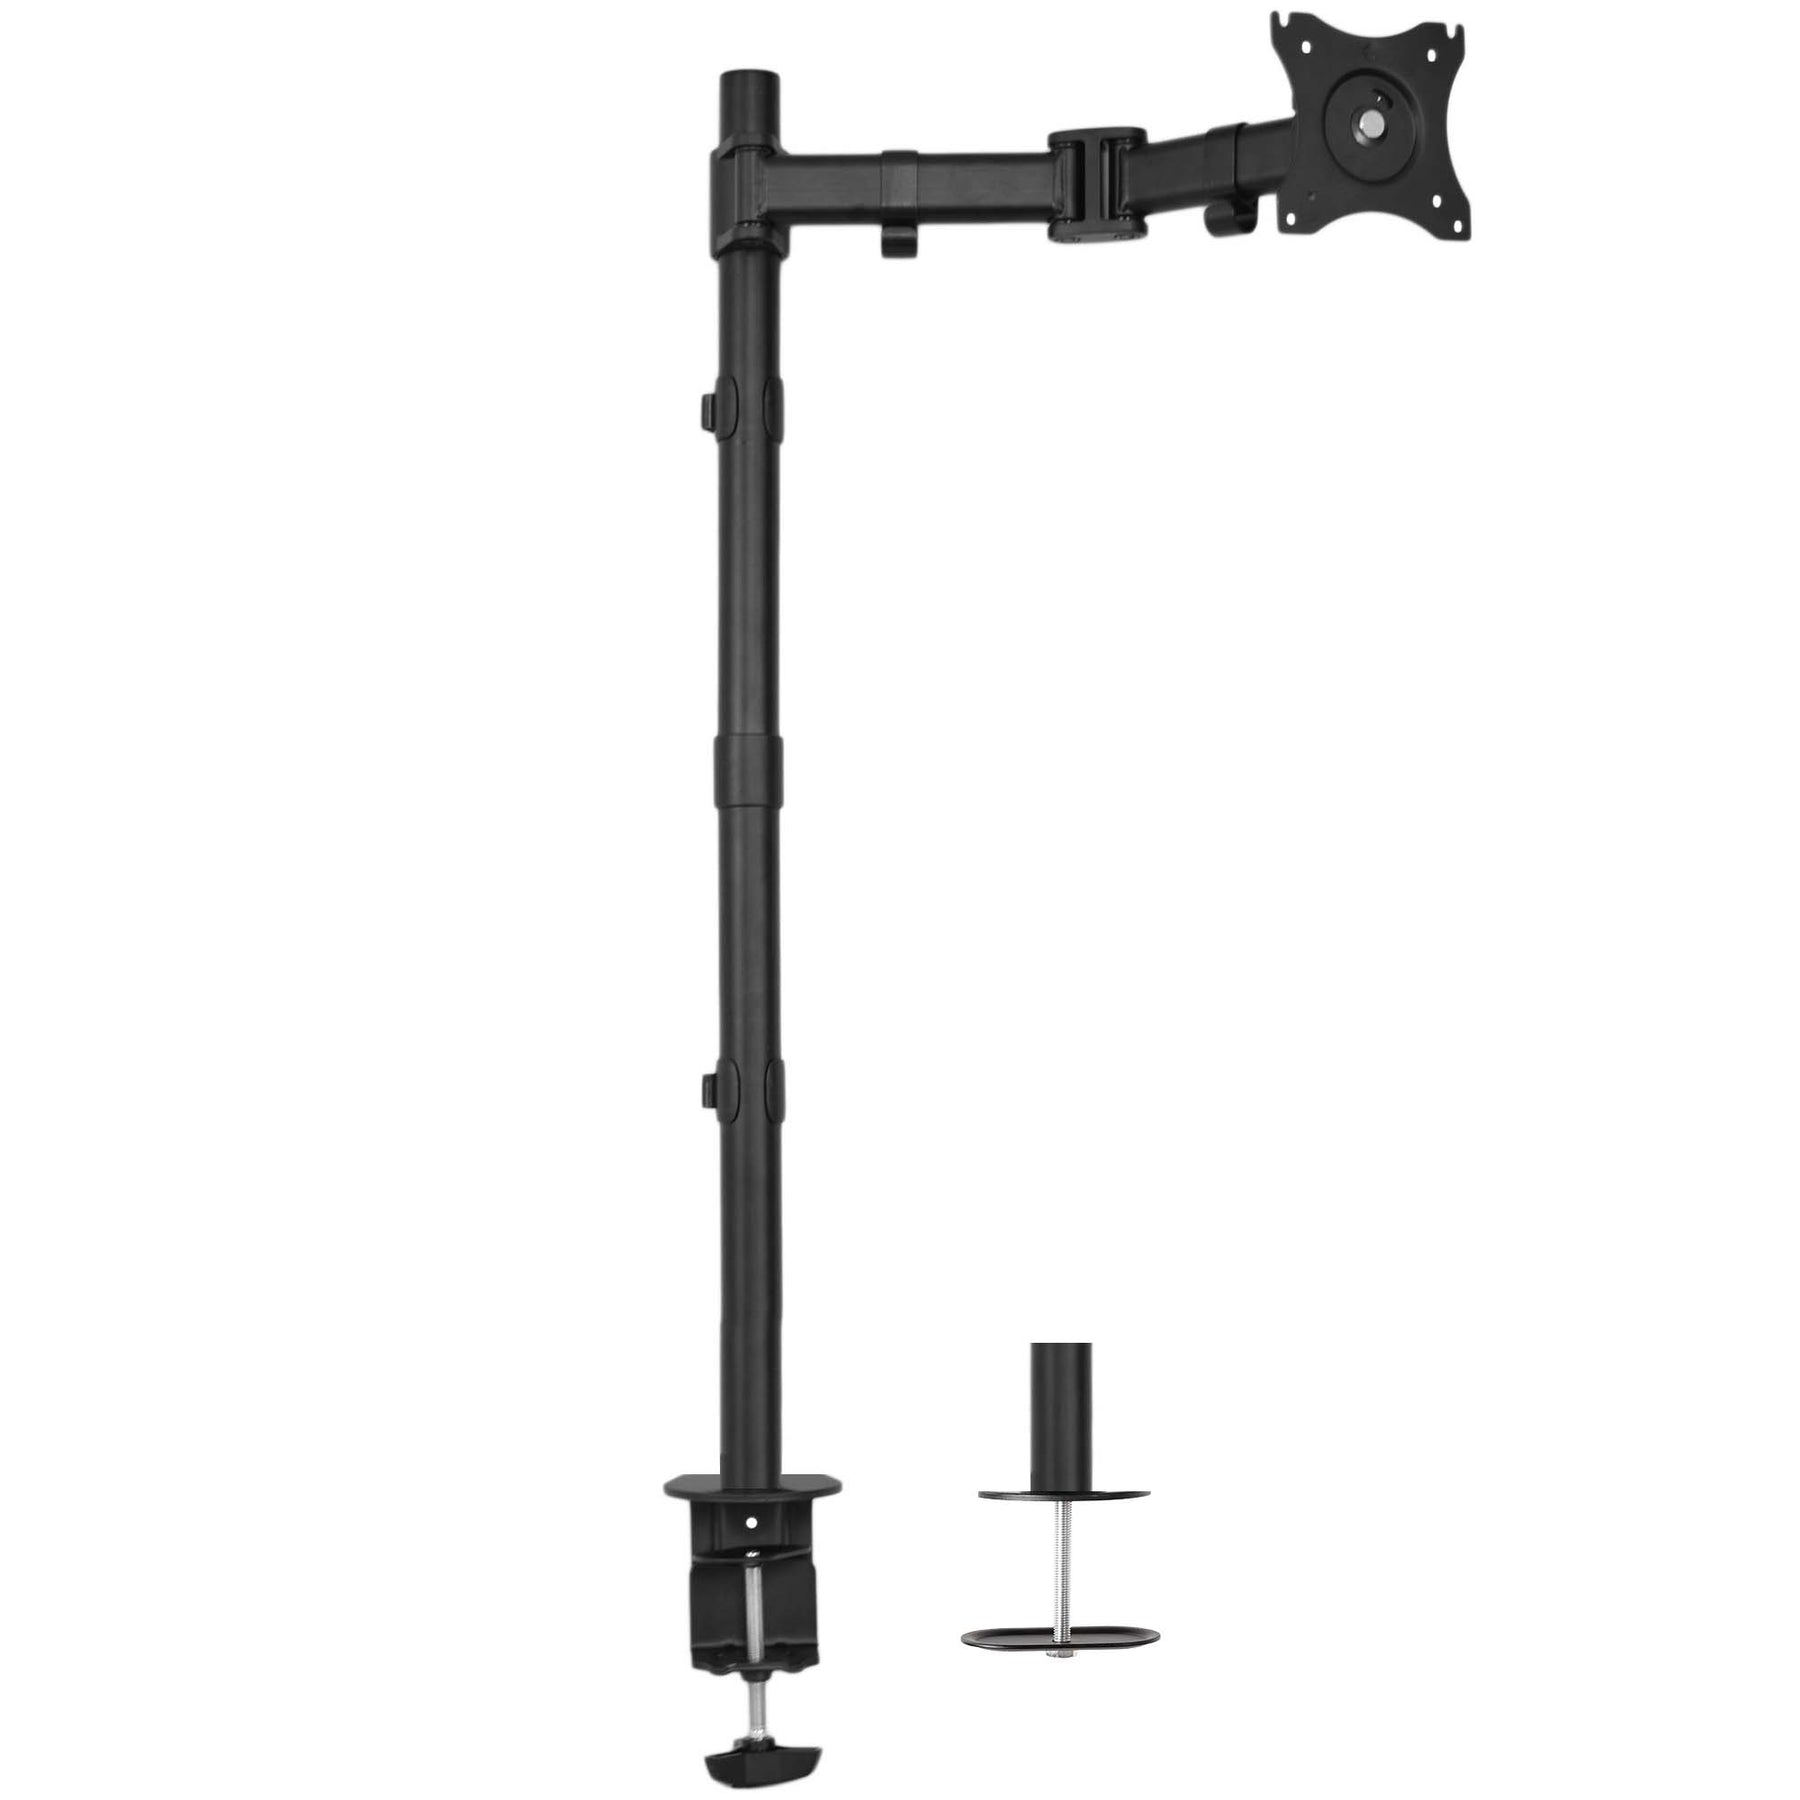 suptek Single LED LCD Monitor Desk Mount Heavy Duty Fully Adjustable Stand  for 1 / One Screen up to 27 inch